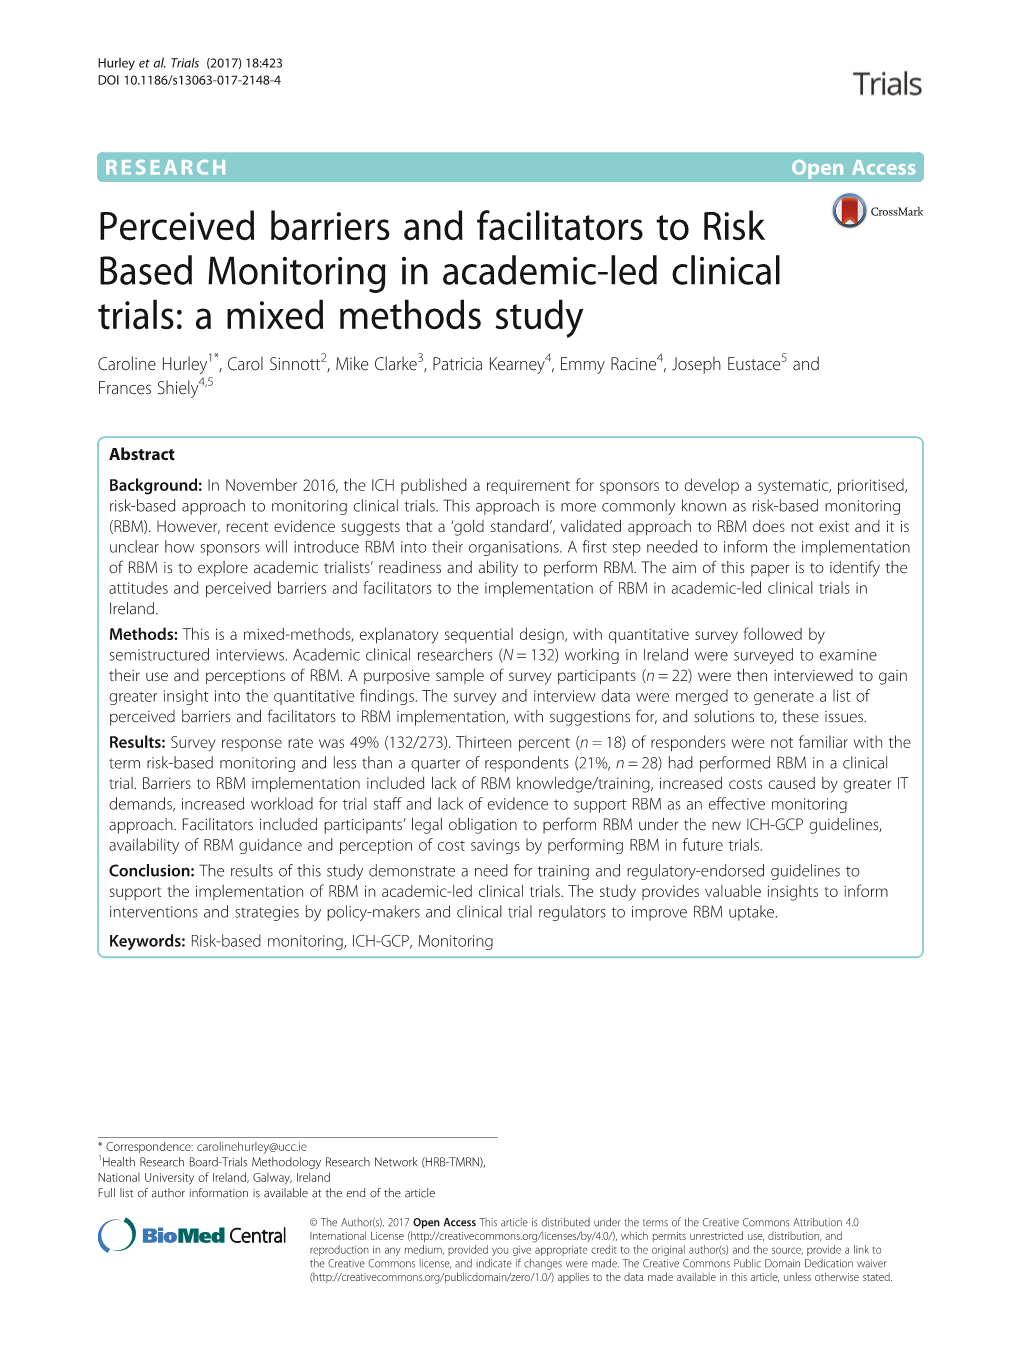 Perceived Barriers and Facilitators to Risk Based Monitoring in Academic